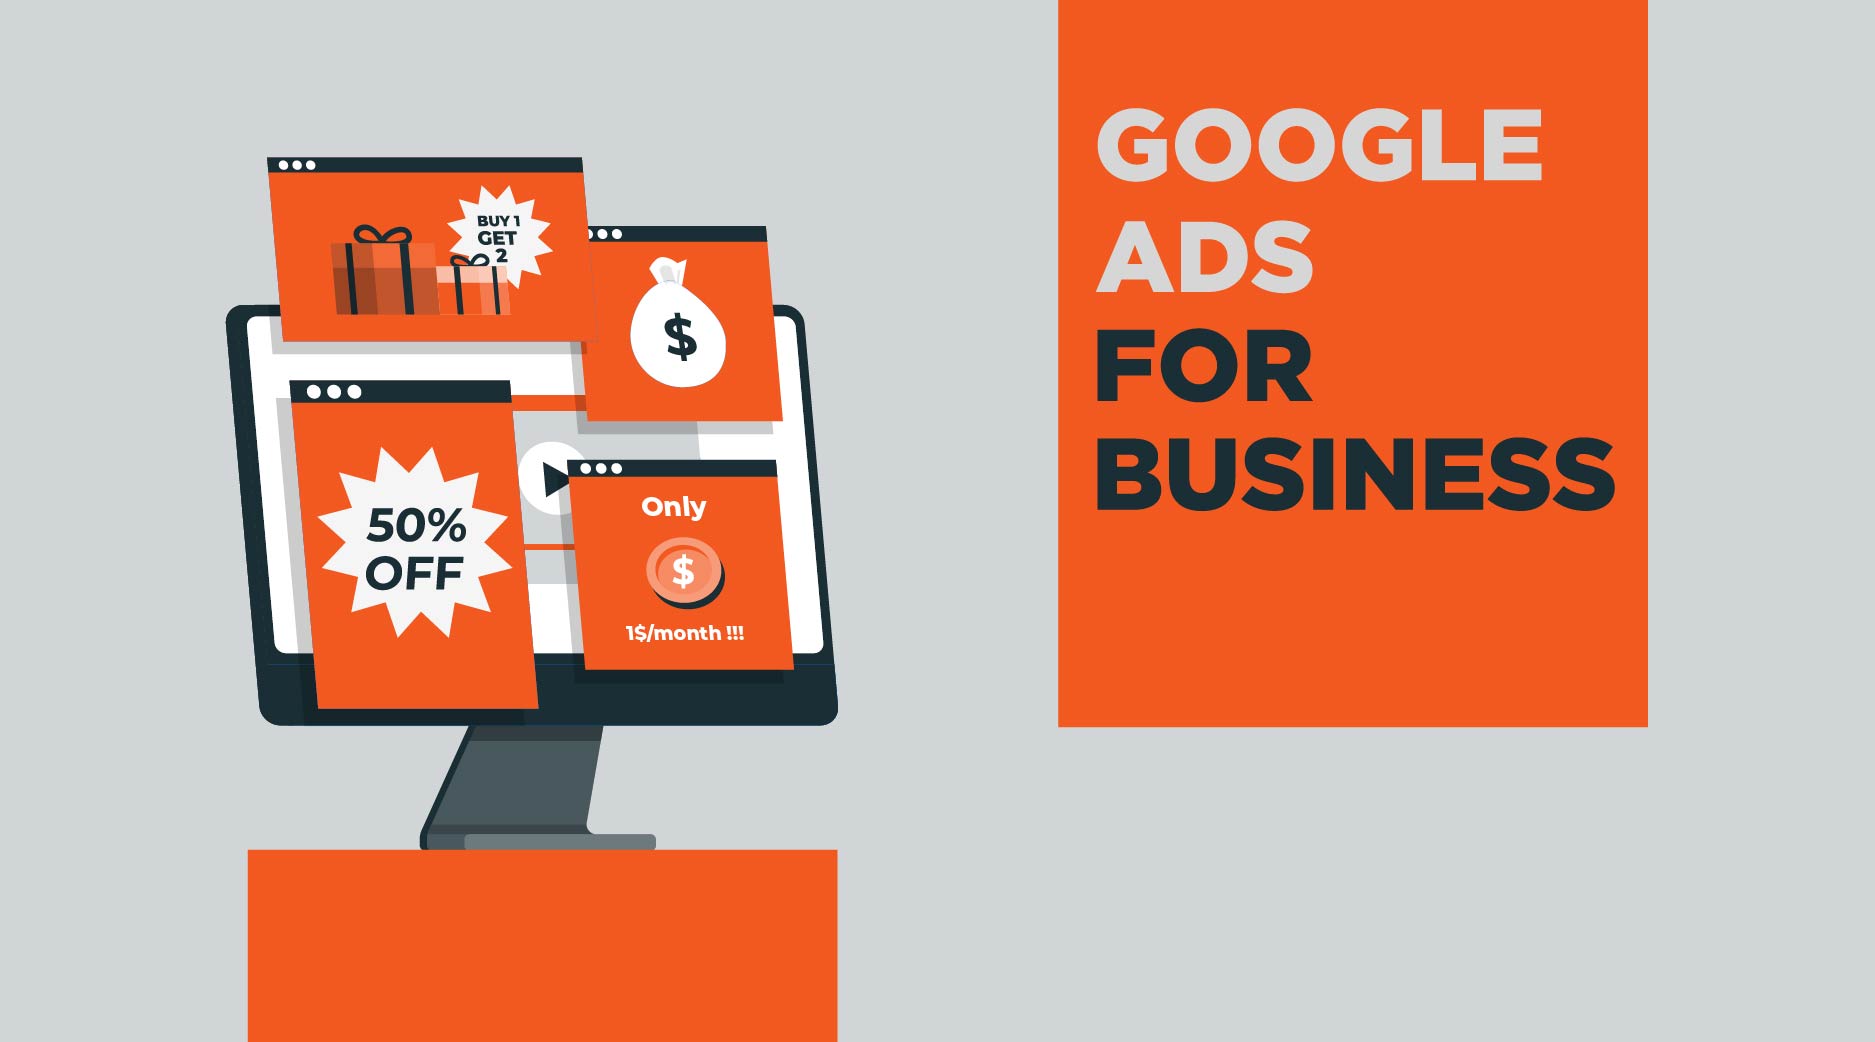 Benefits of Google Ads for Businesses